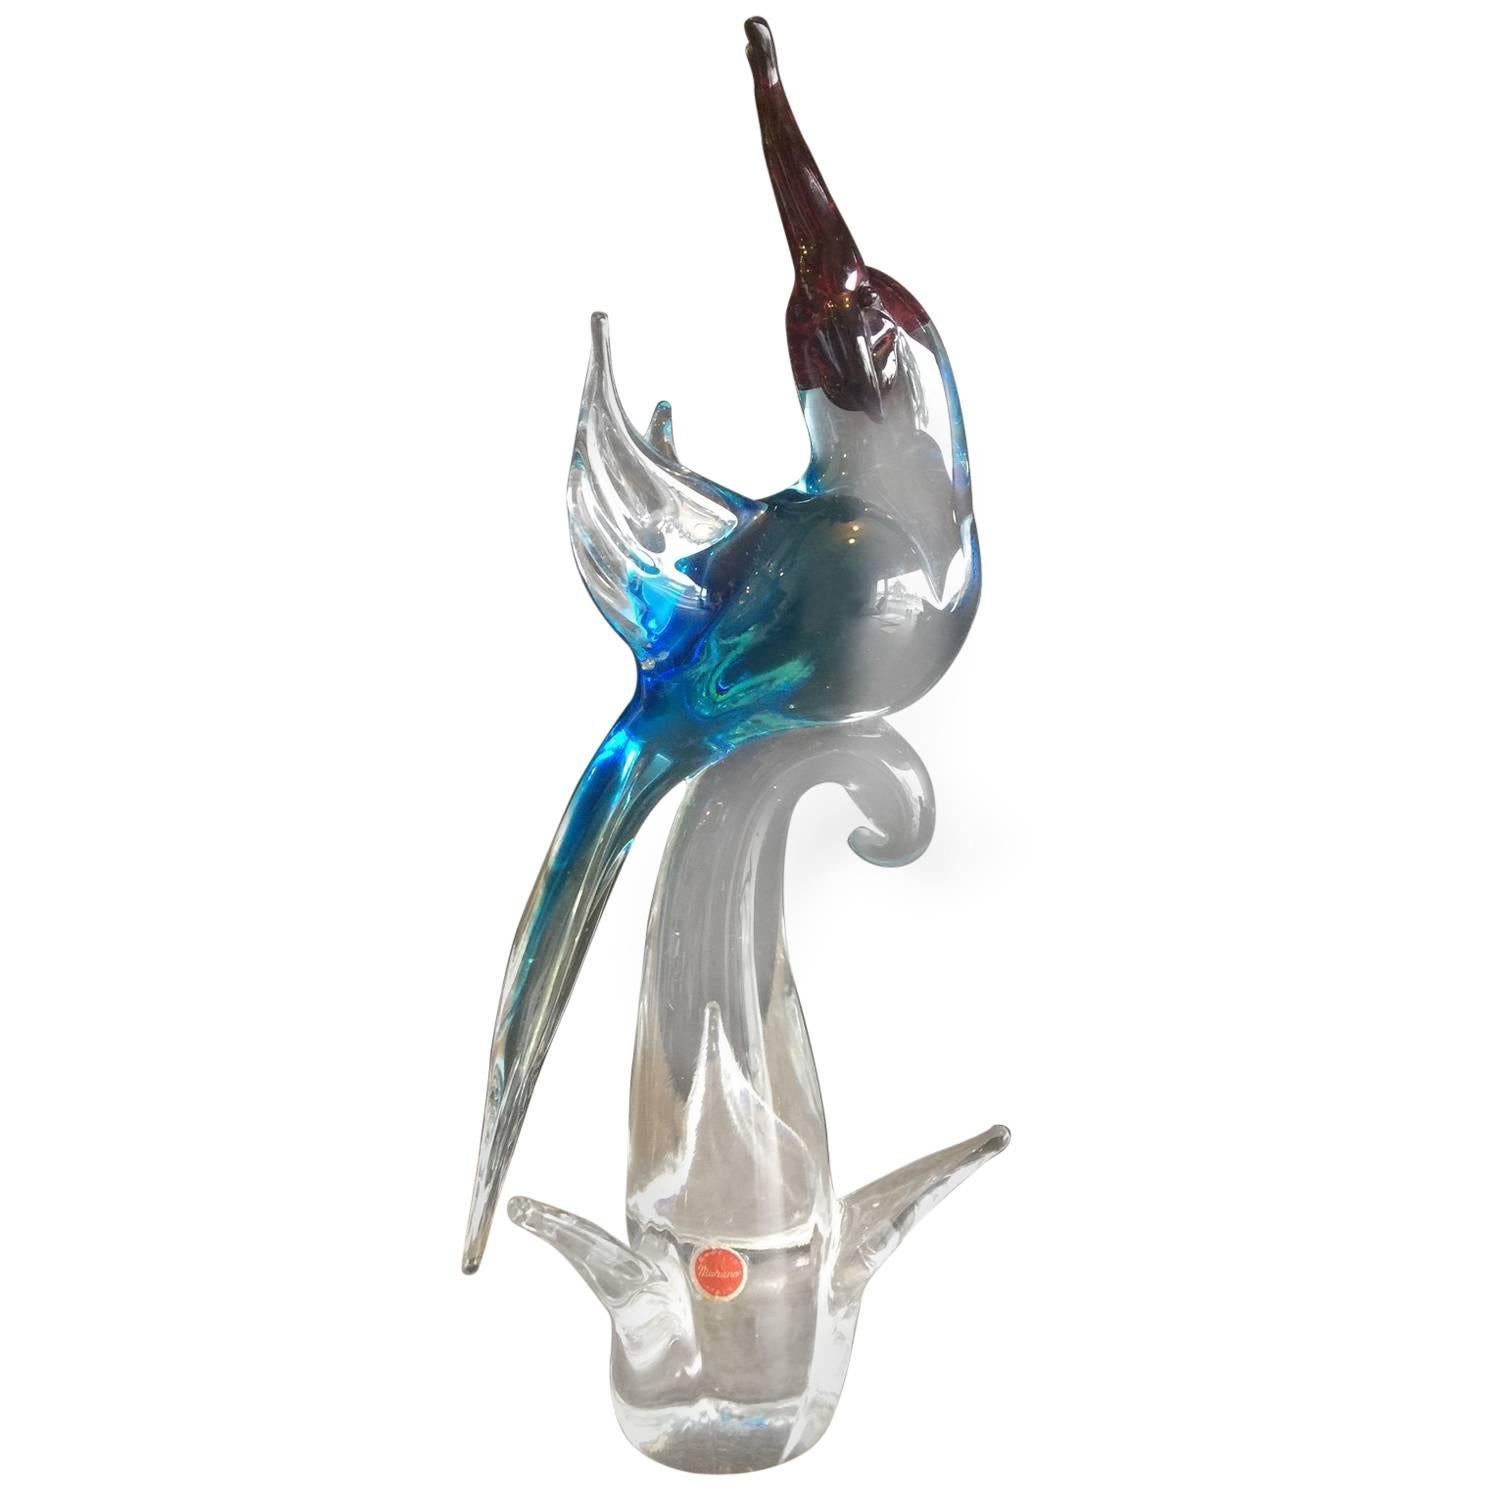 Stylish Cockatoo or Bird Art Glass Sculpture by Murano Glass, circa 1960s For Sale